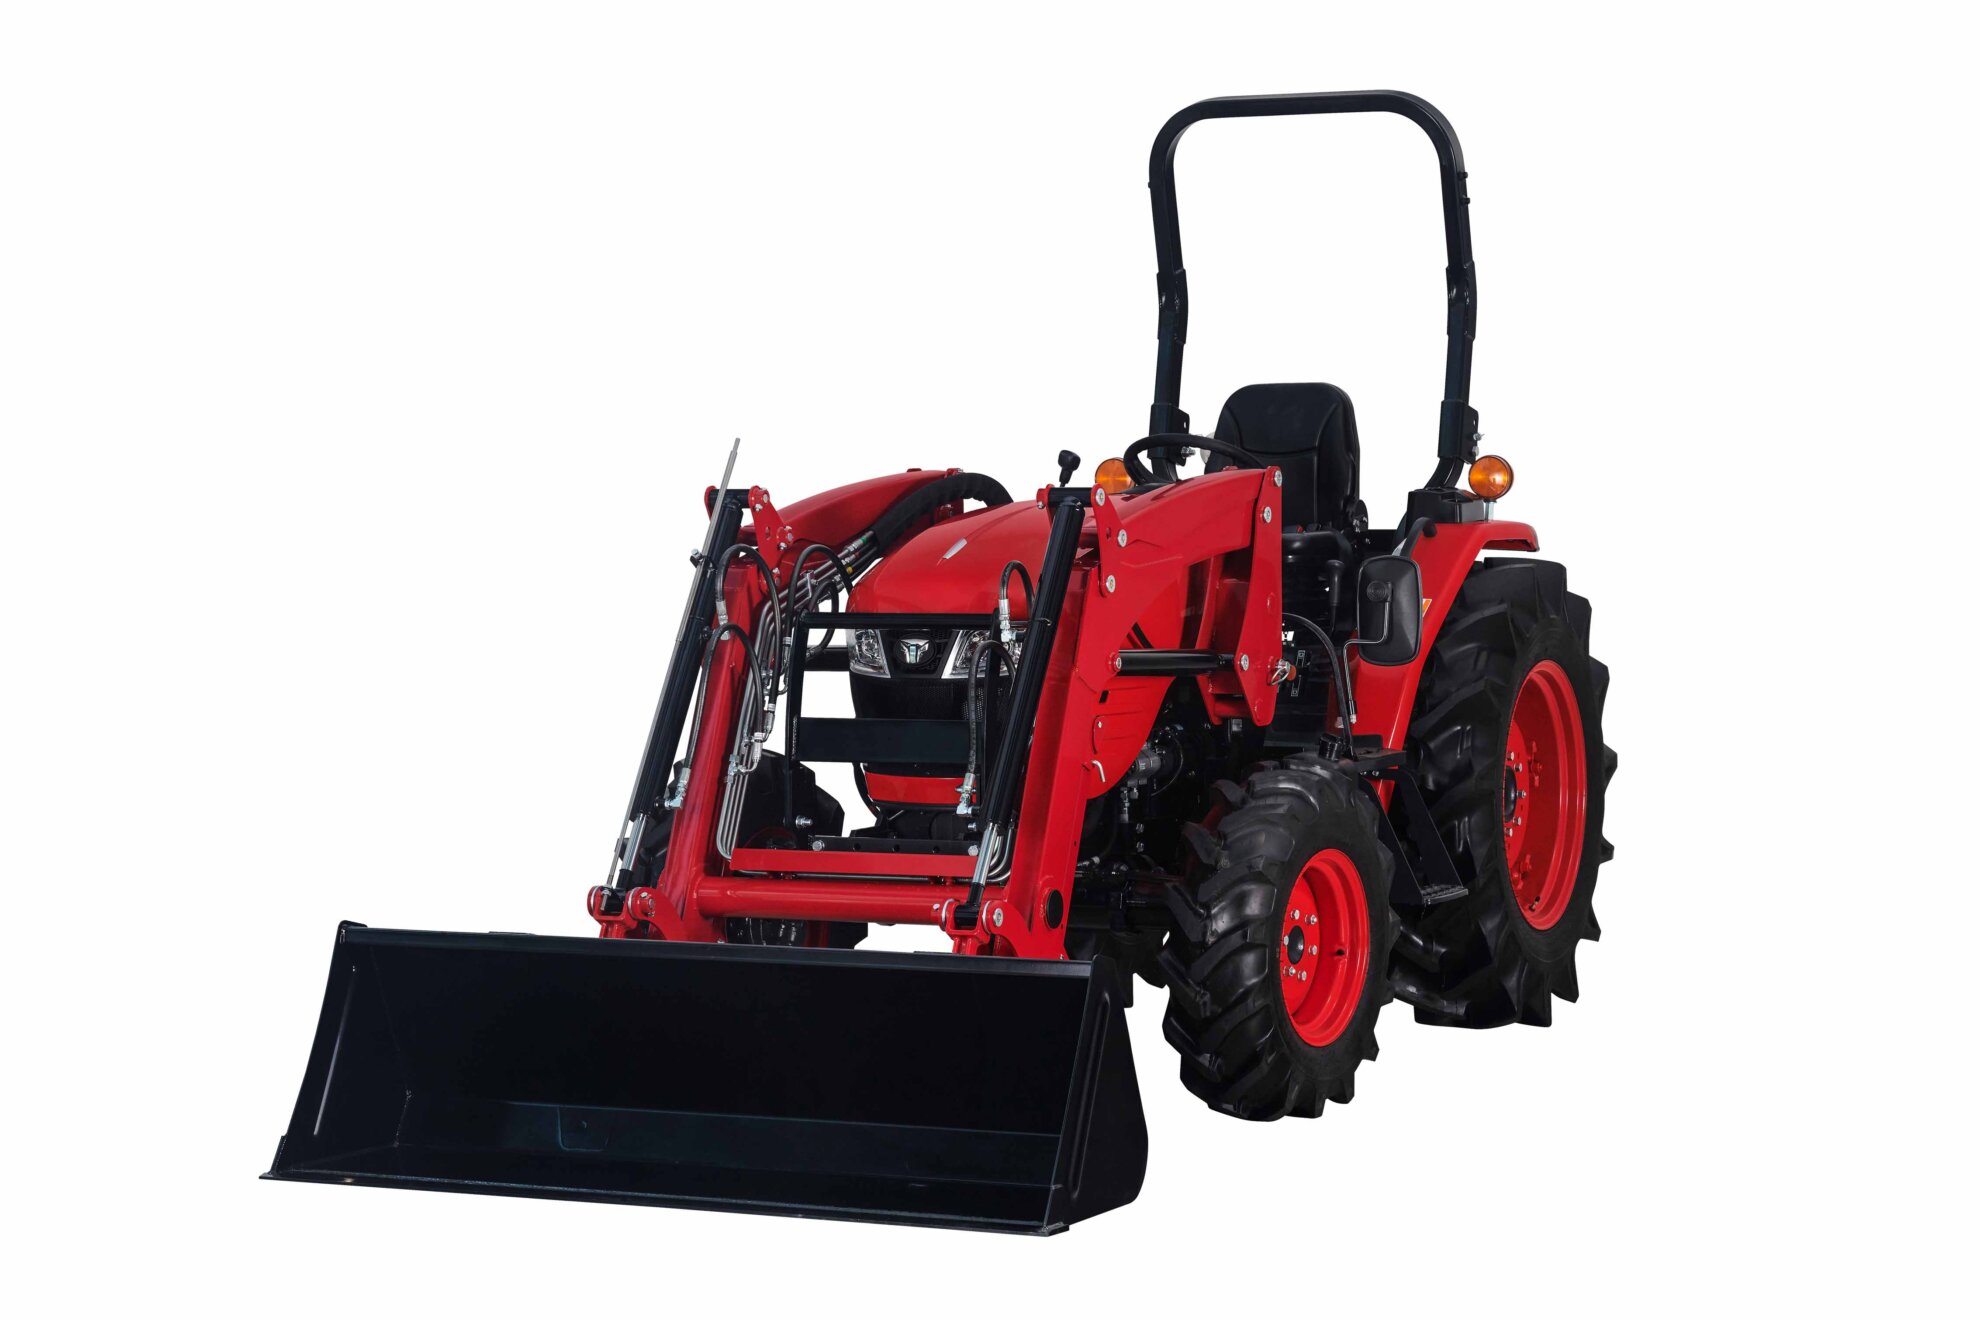 Tym/Branson compact tractor 6225R (Gear drive)